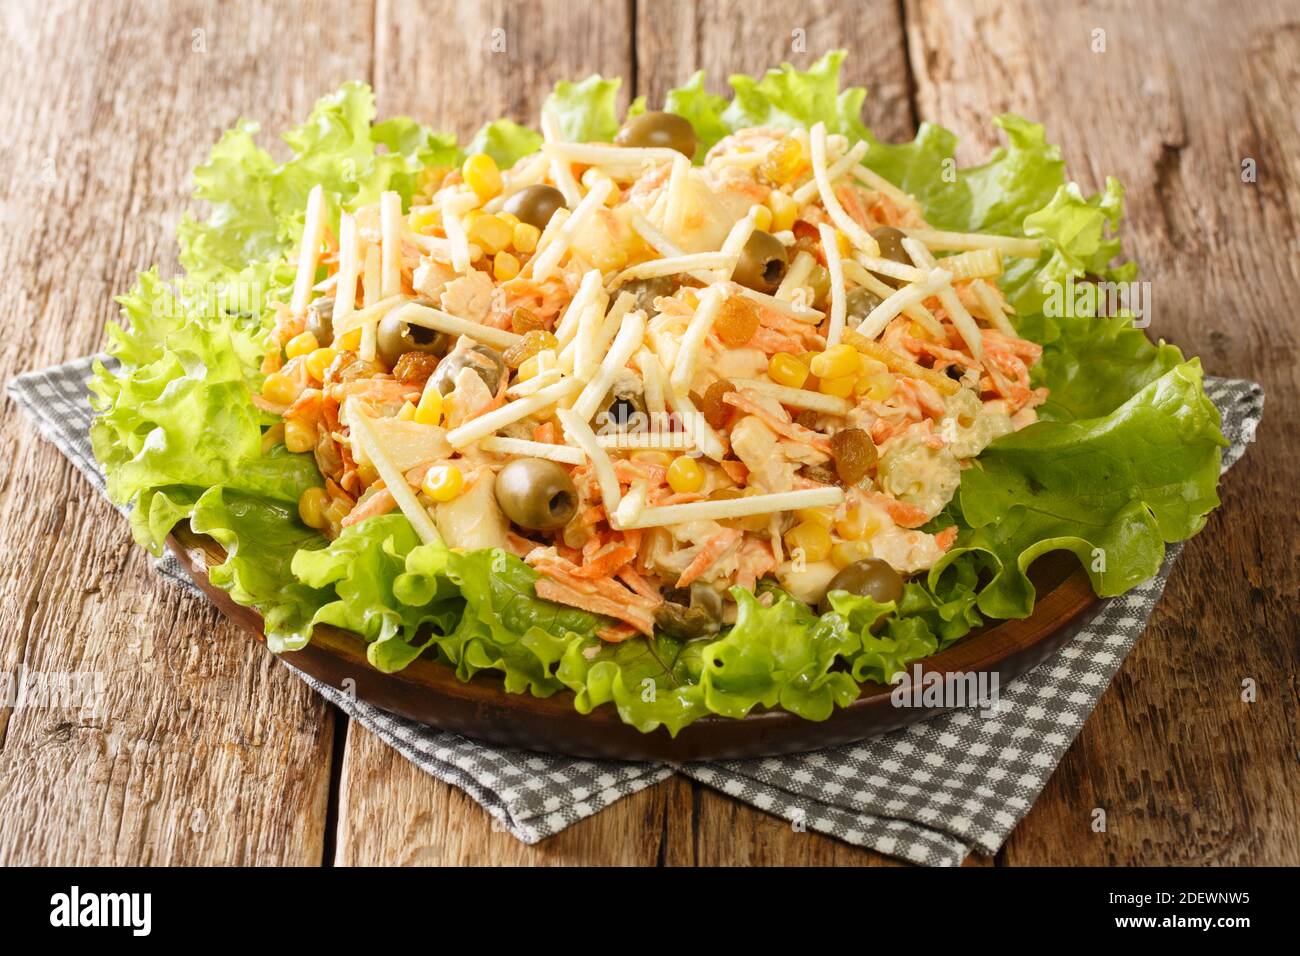 Serving Of Homemade Salpicao Salad Of Chicken Vegetables Raisins Olives And Potato Sticks Close Up In A Plate On The Table Horizontal Stock Photo Alamy